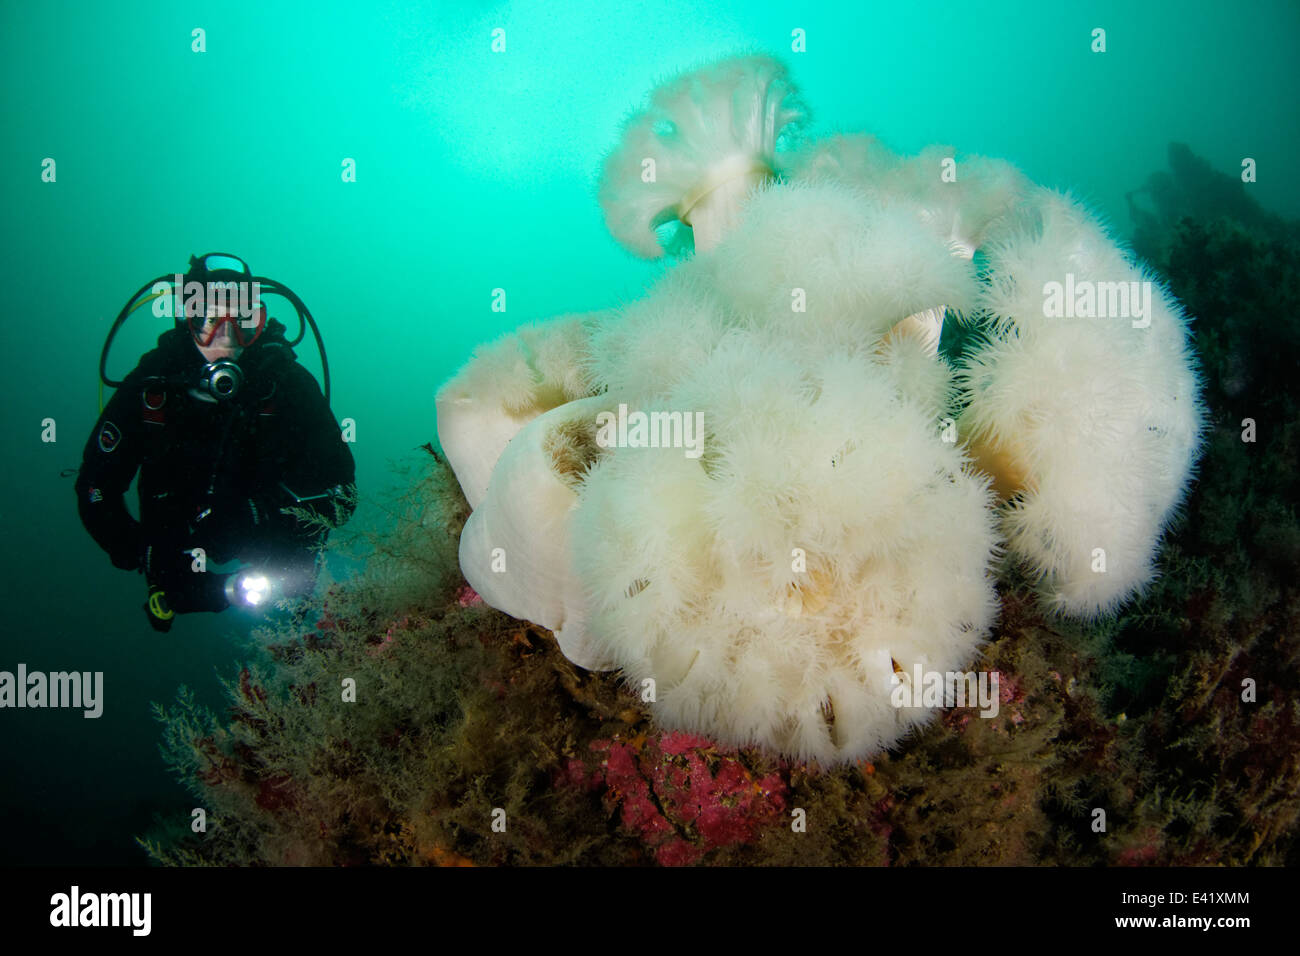 plumose anemone or frilles-anemone and scuba diver, little Strytan, small chimney, Eyjafjord, North Iceland, Greenland Sea Stock Photo